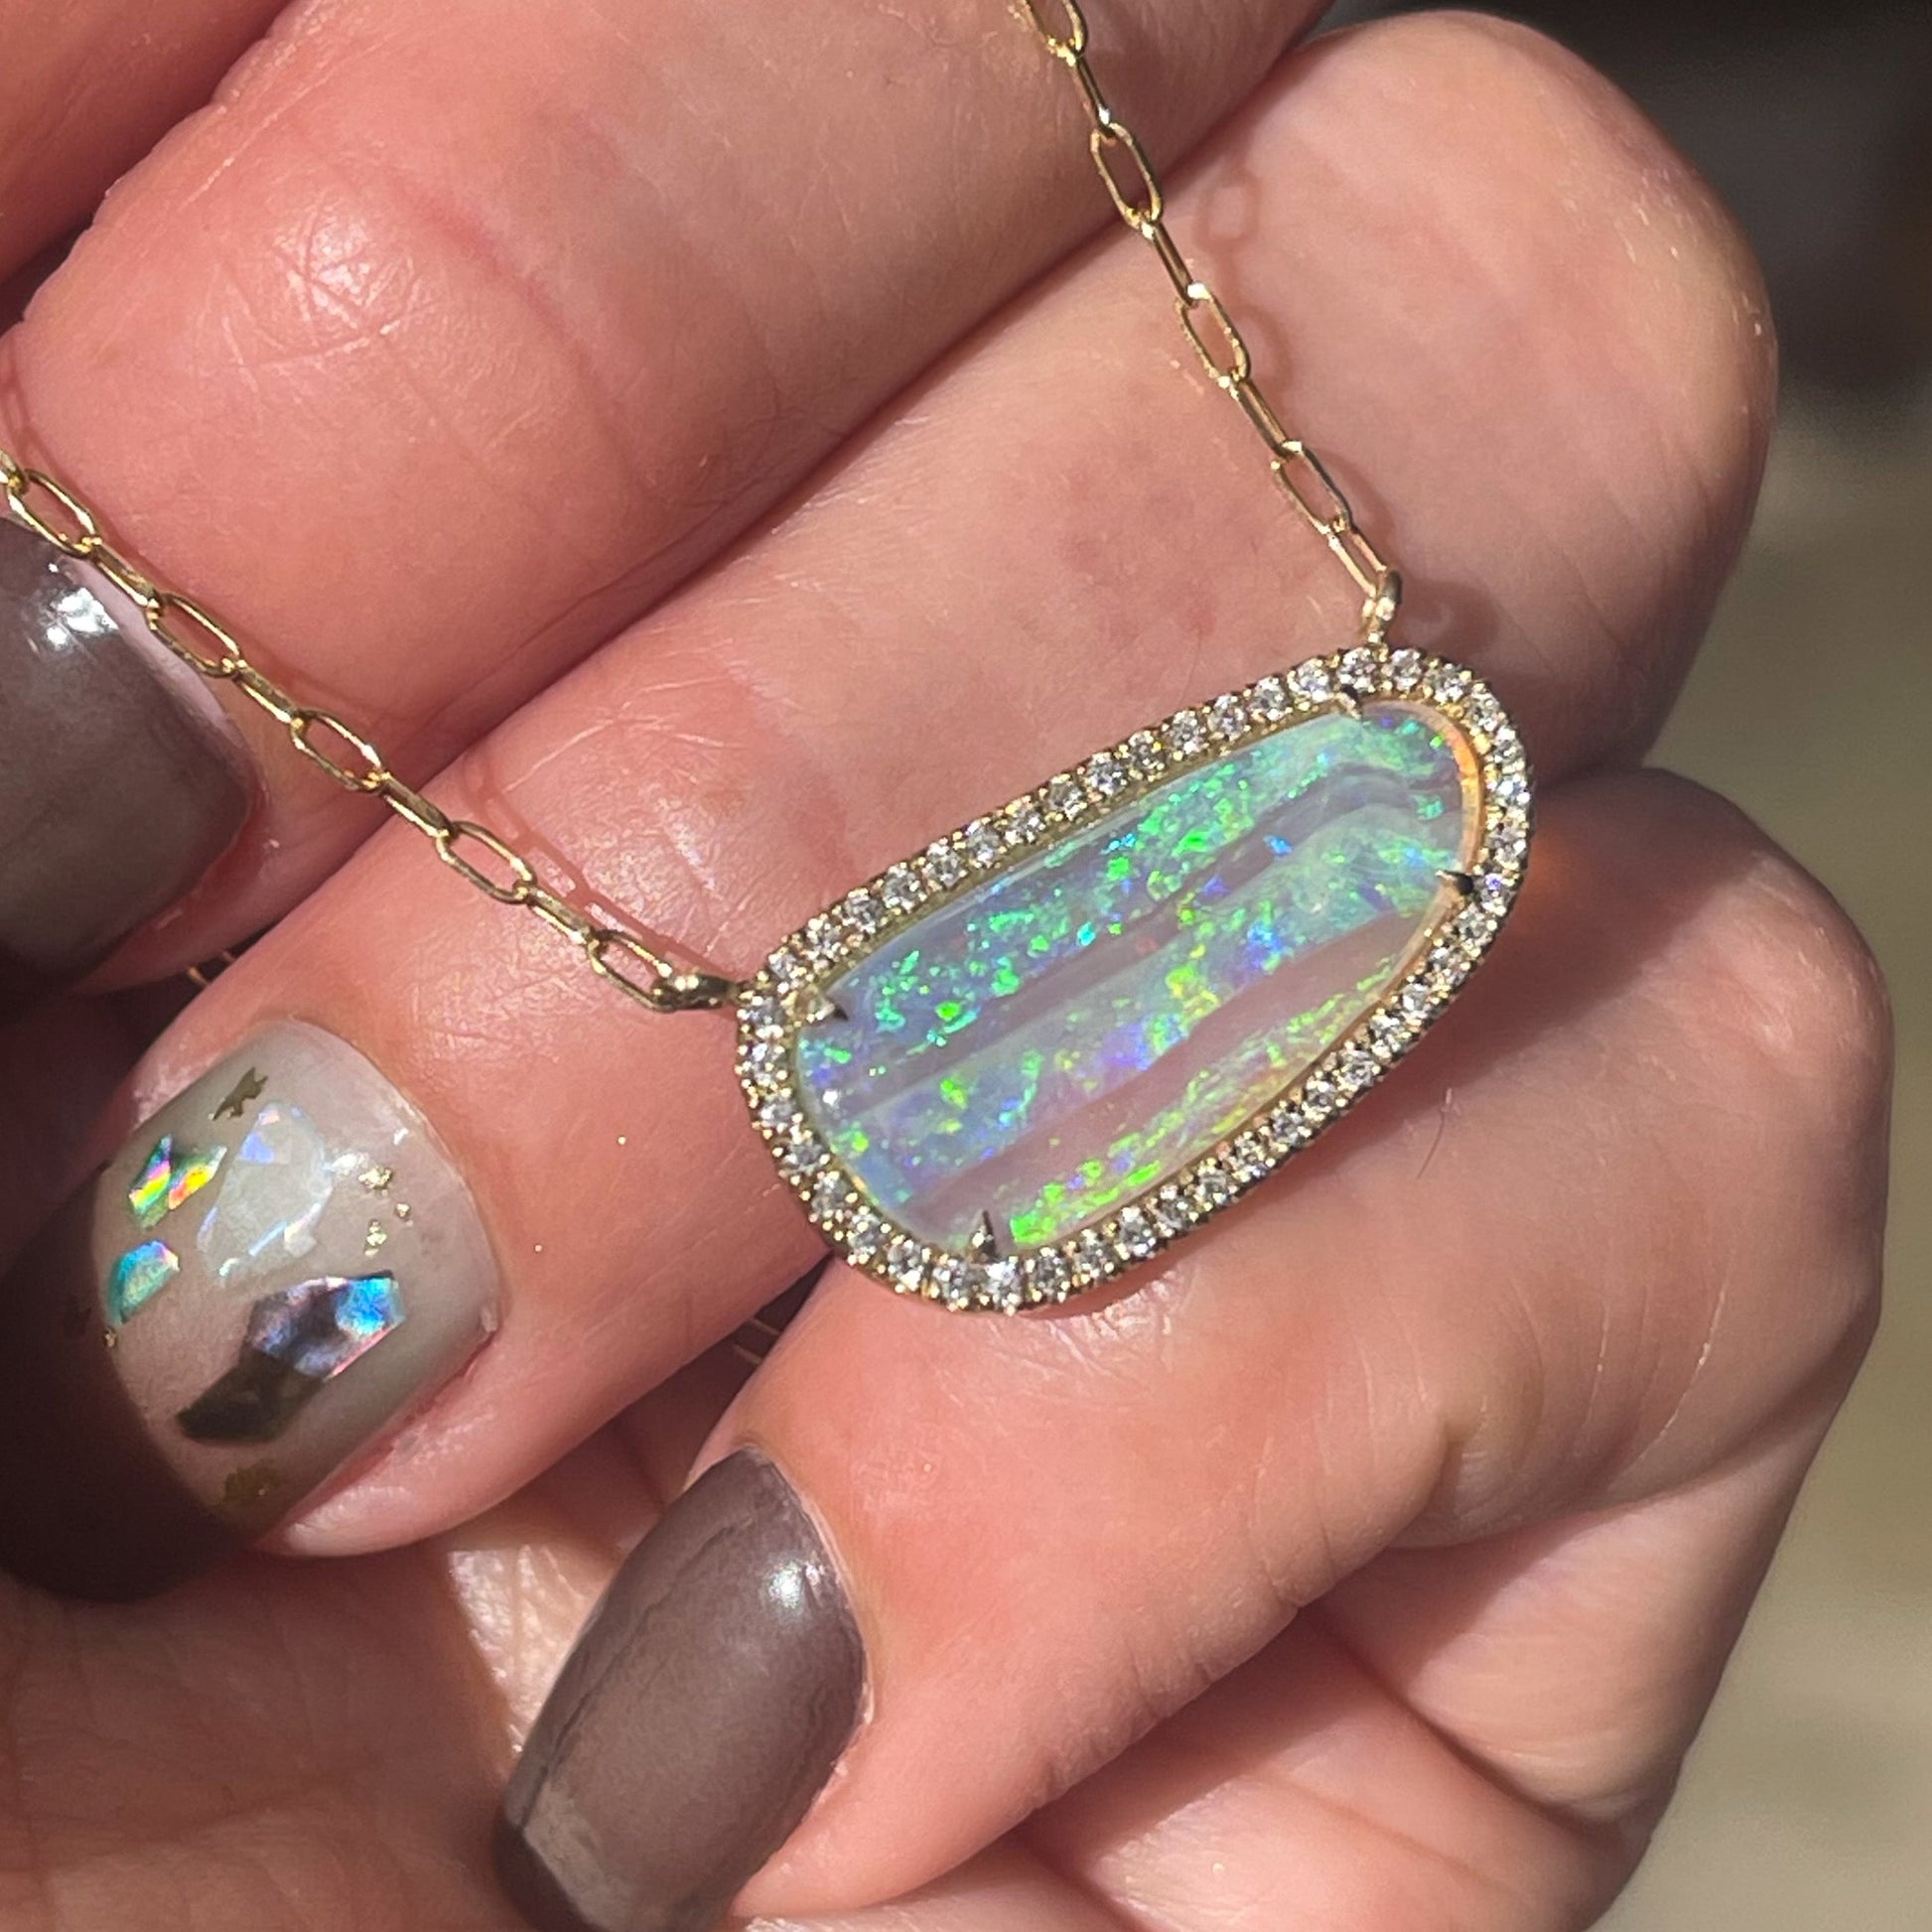 An Australian Opal Necklace by NIXIN Jewelry set in 14k gold with a Coober Pedy Opal in a prong setting.